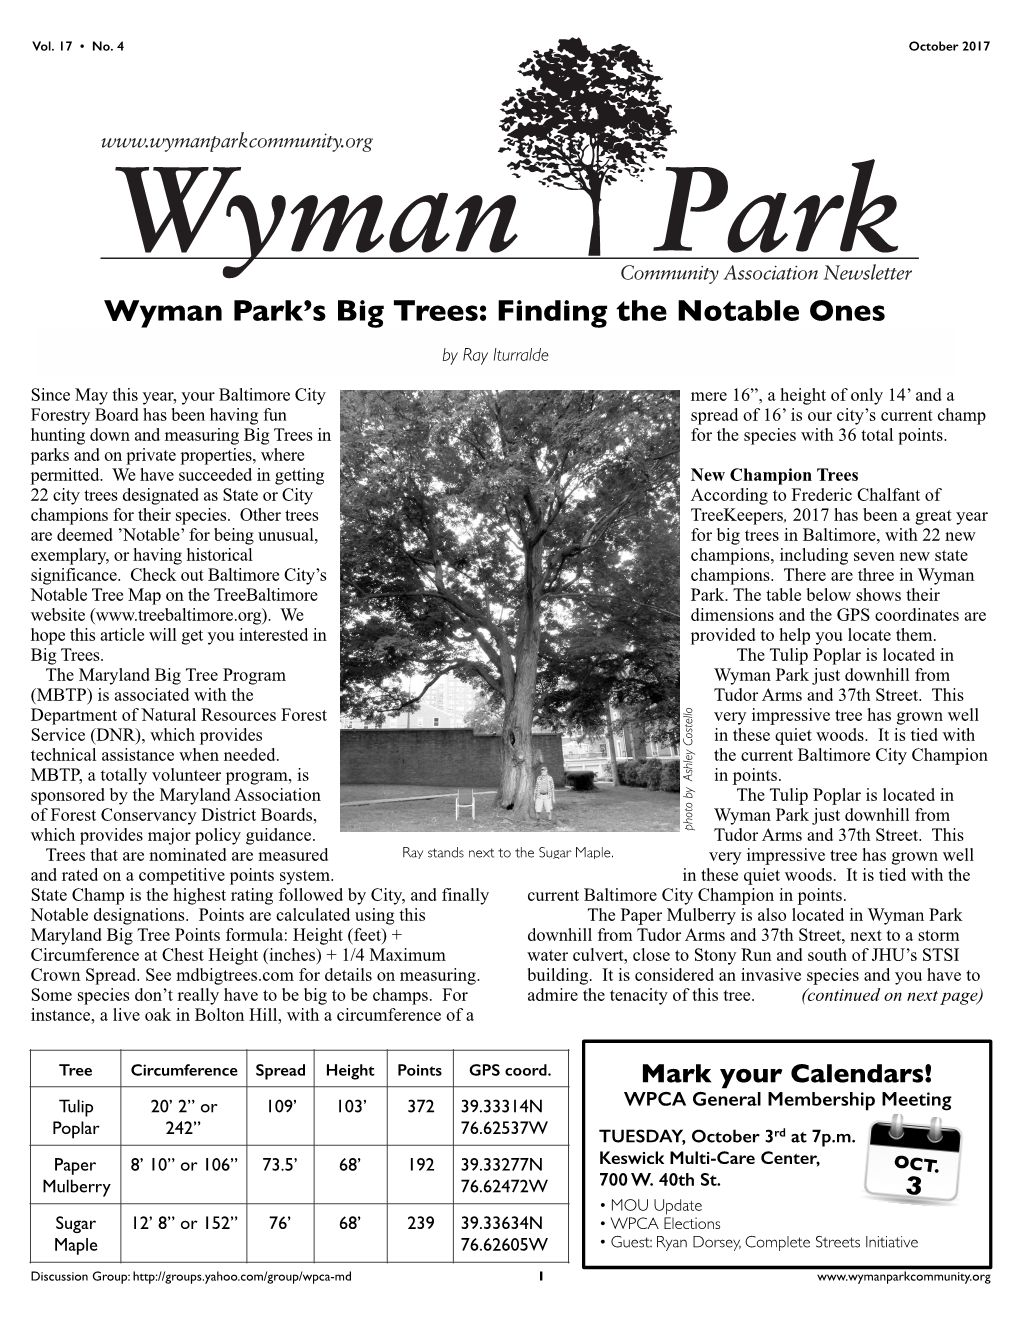 Wyman Park's Big Trees: Finding the Notable Ones